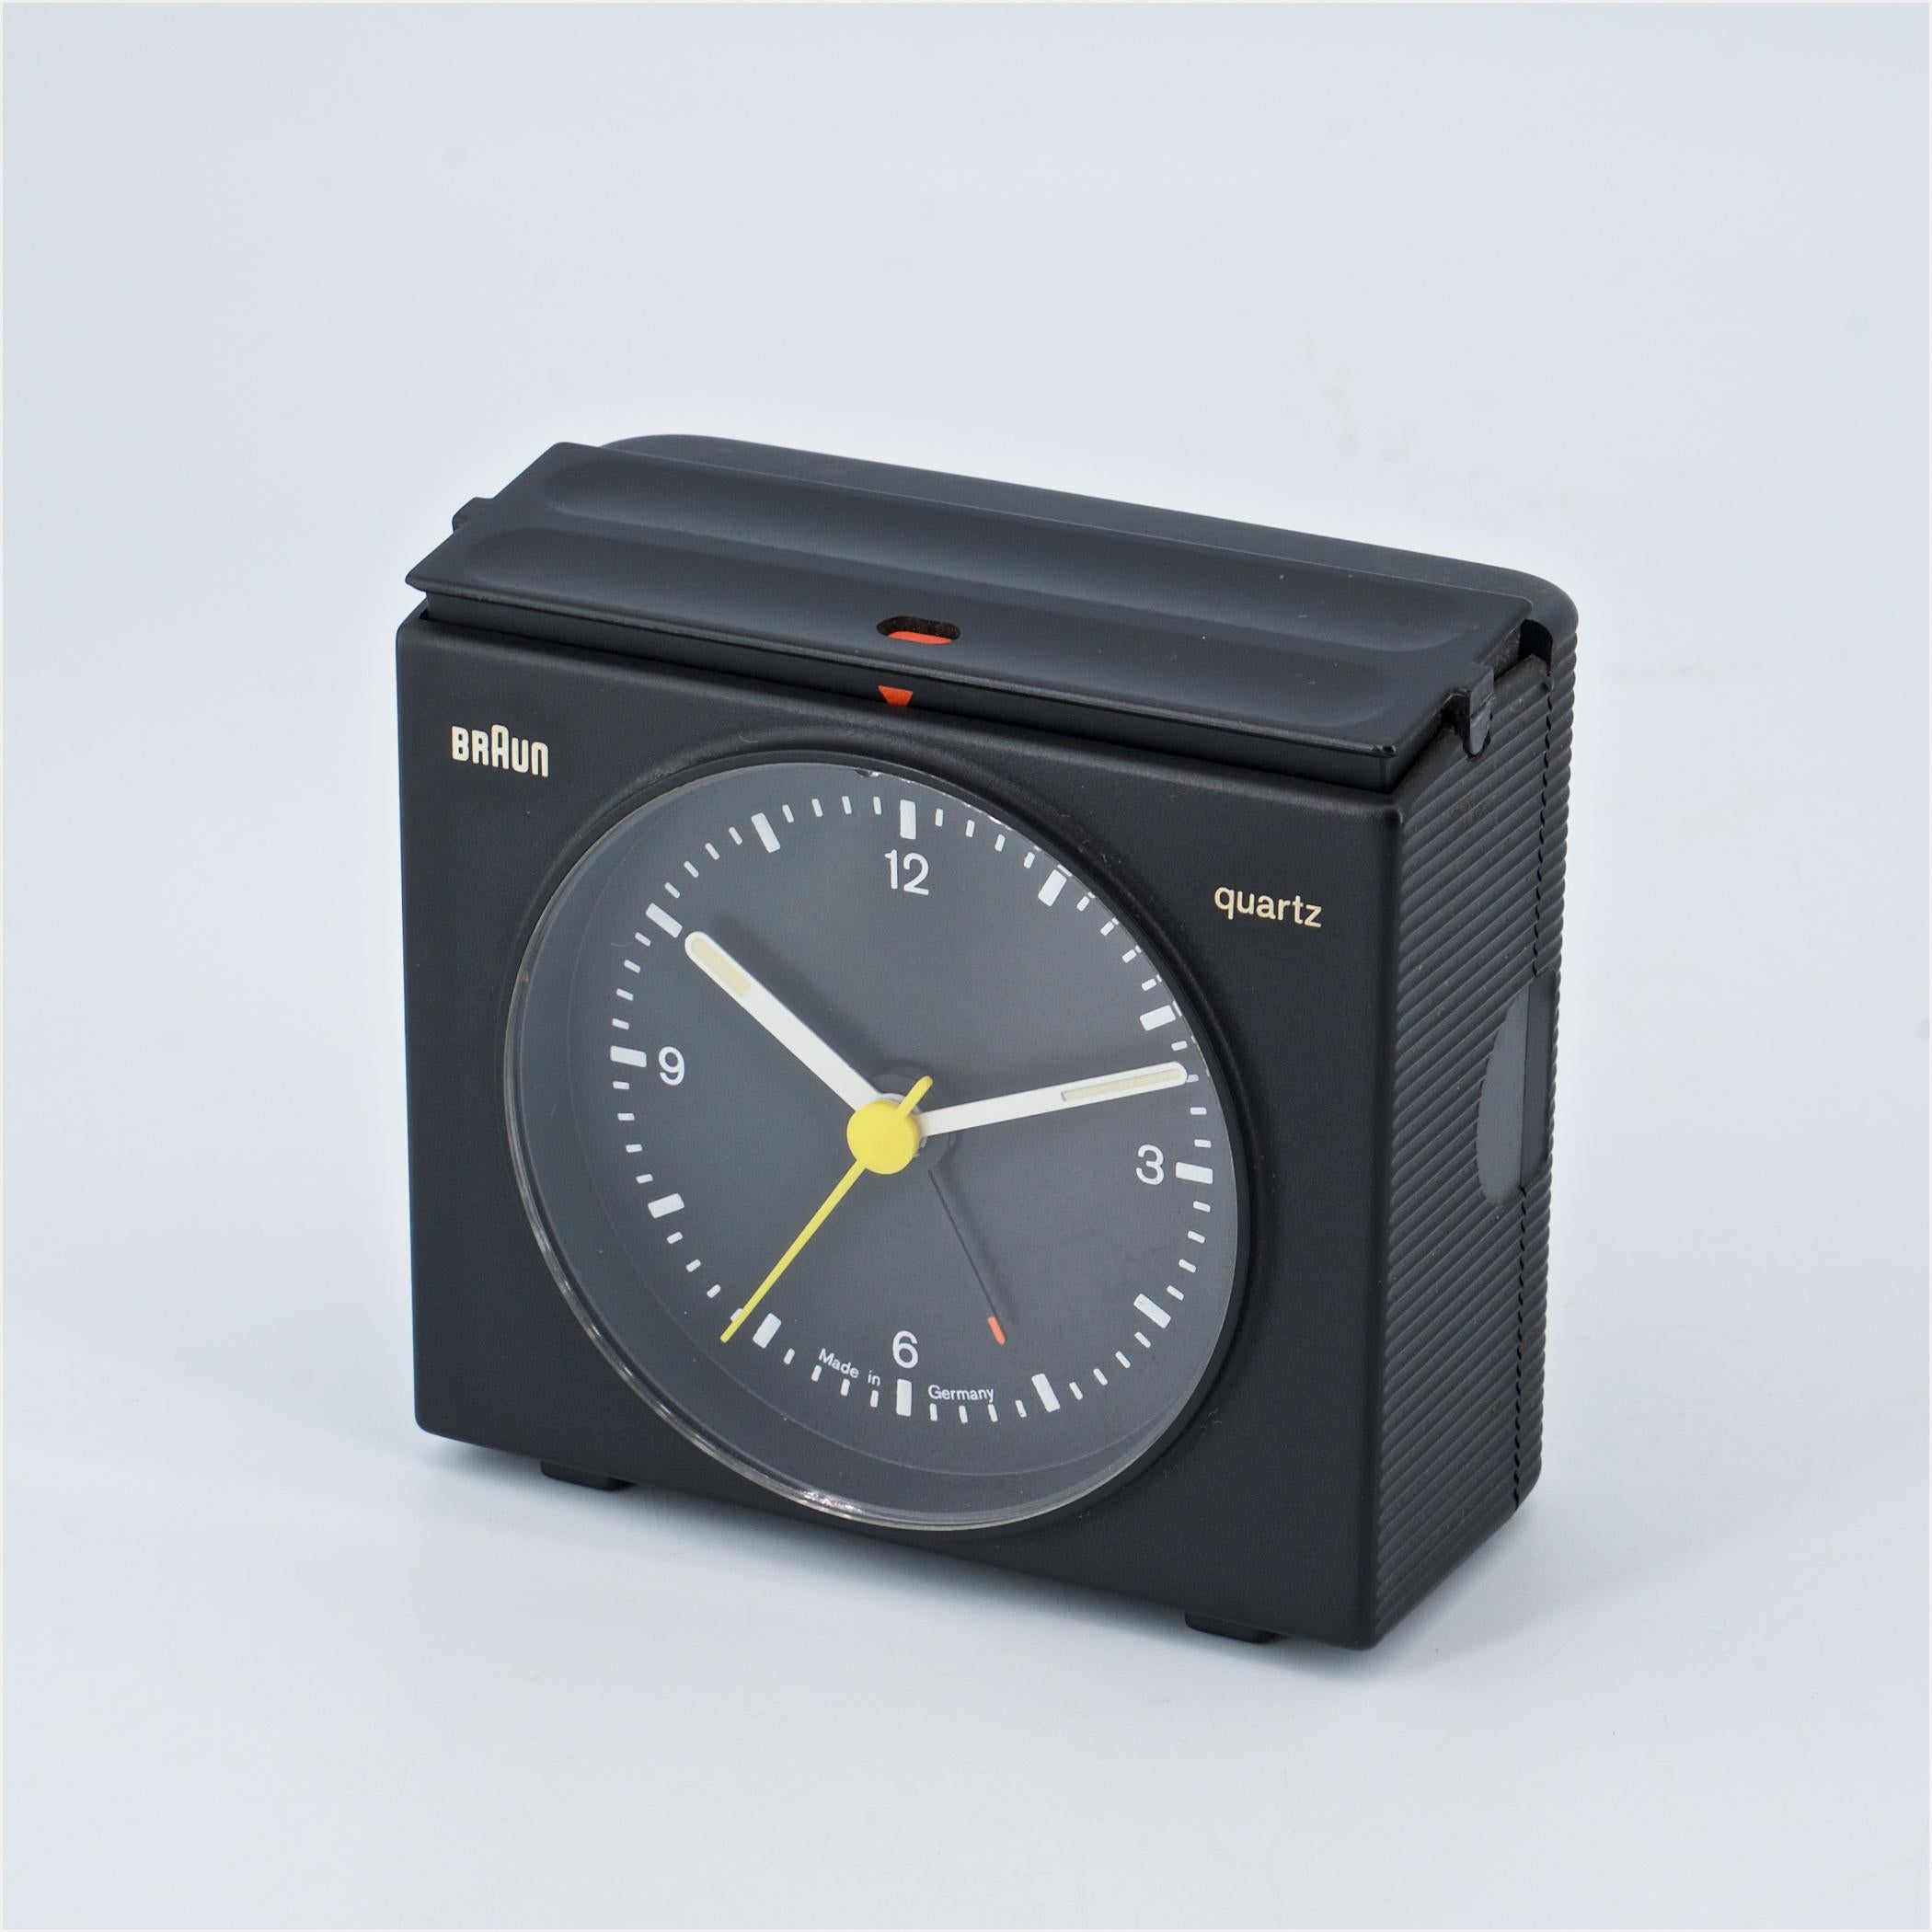 Vintage 1970s Braun Table Alarm Clock by Dieter Rams + Dietrich Lubs In Good Condition For Sale In Hyattsville, MD